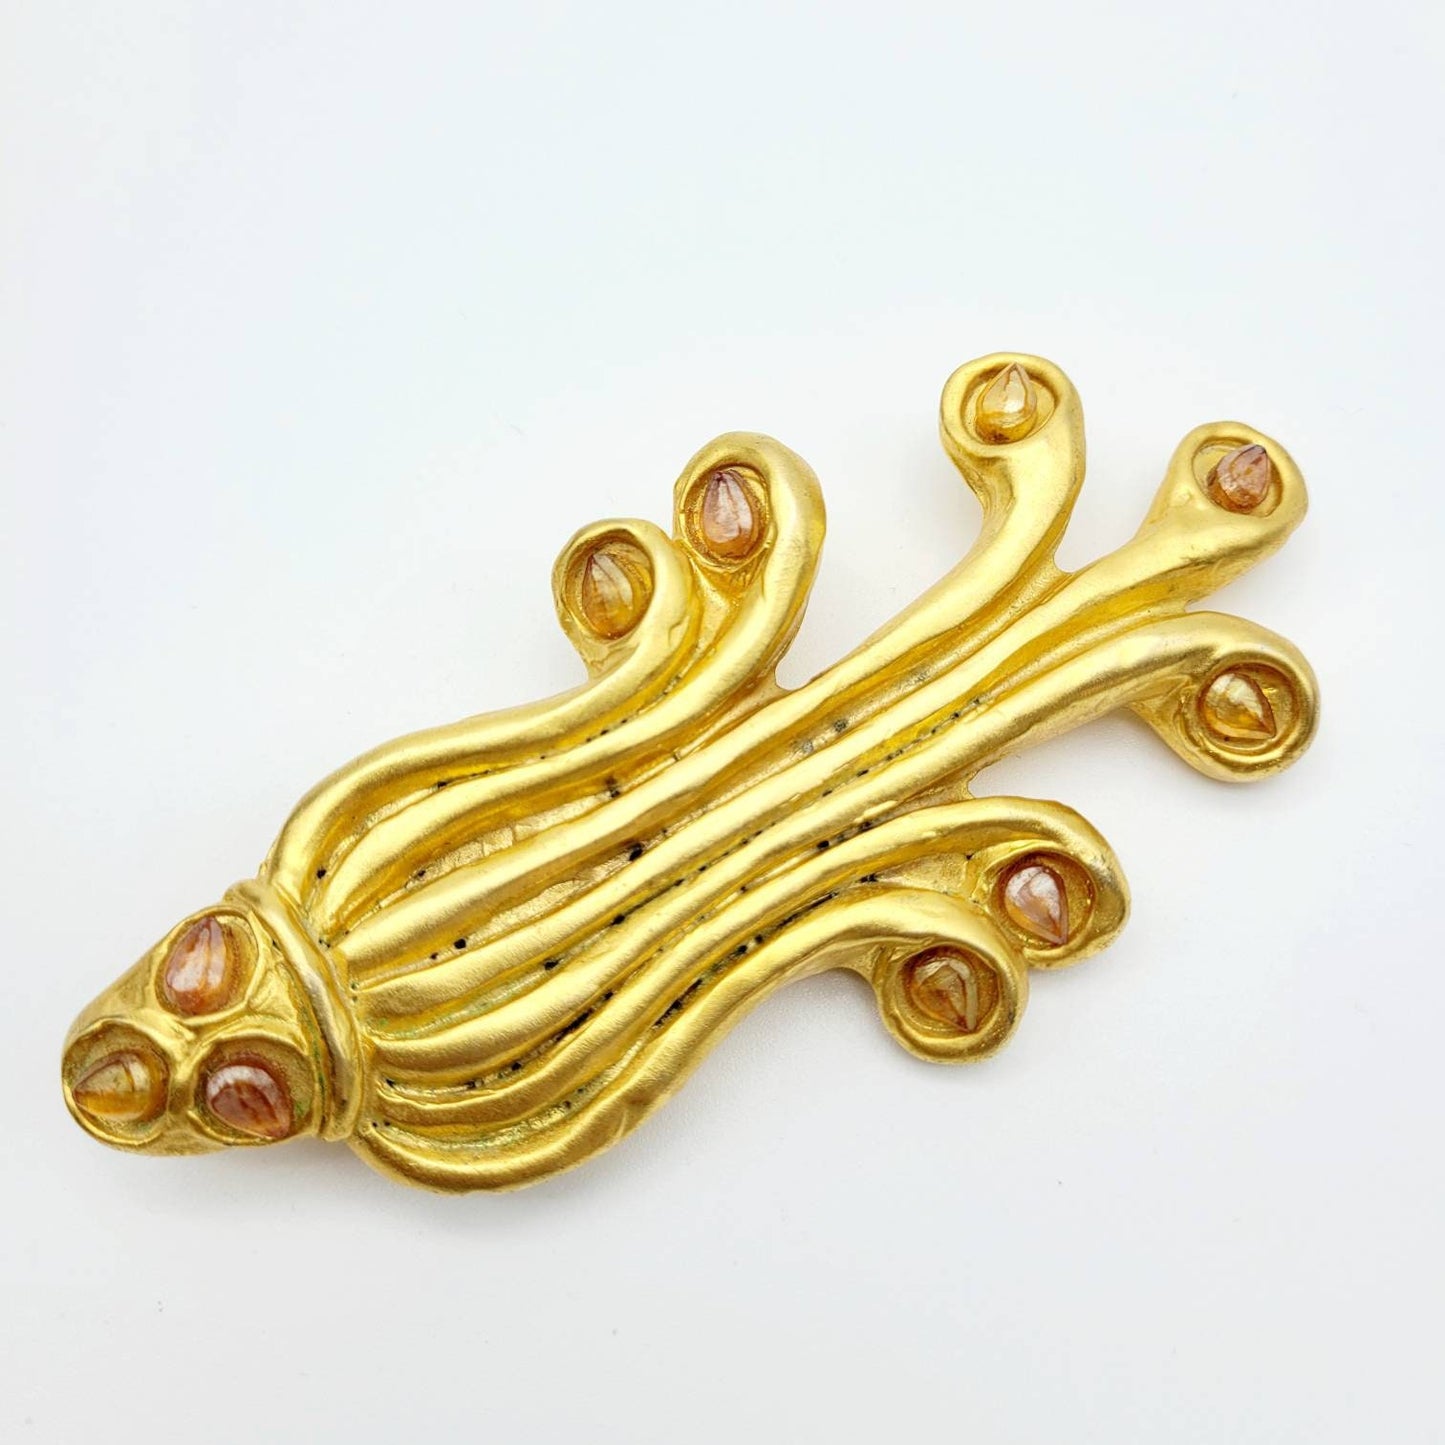 Vintage French Brooch - Secondista